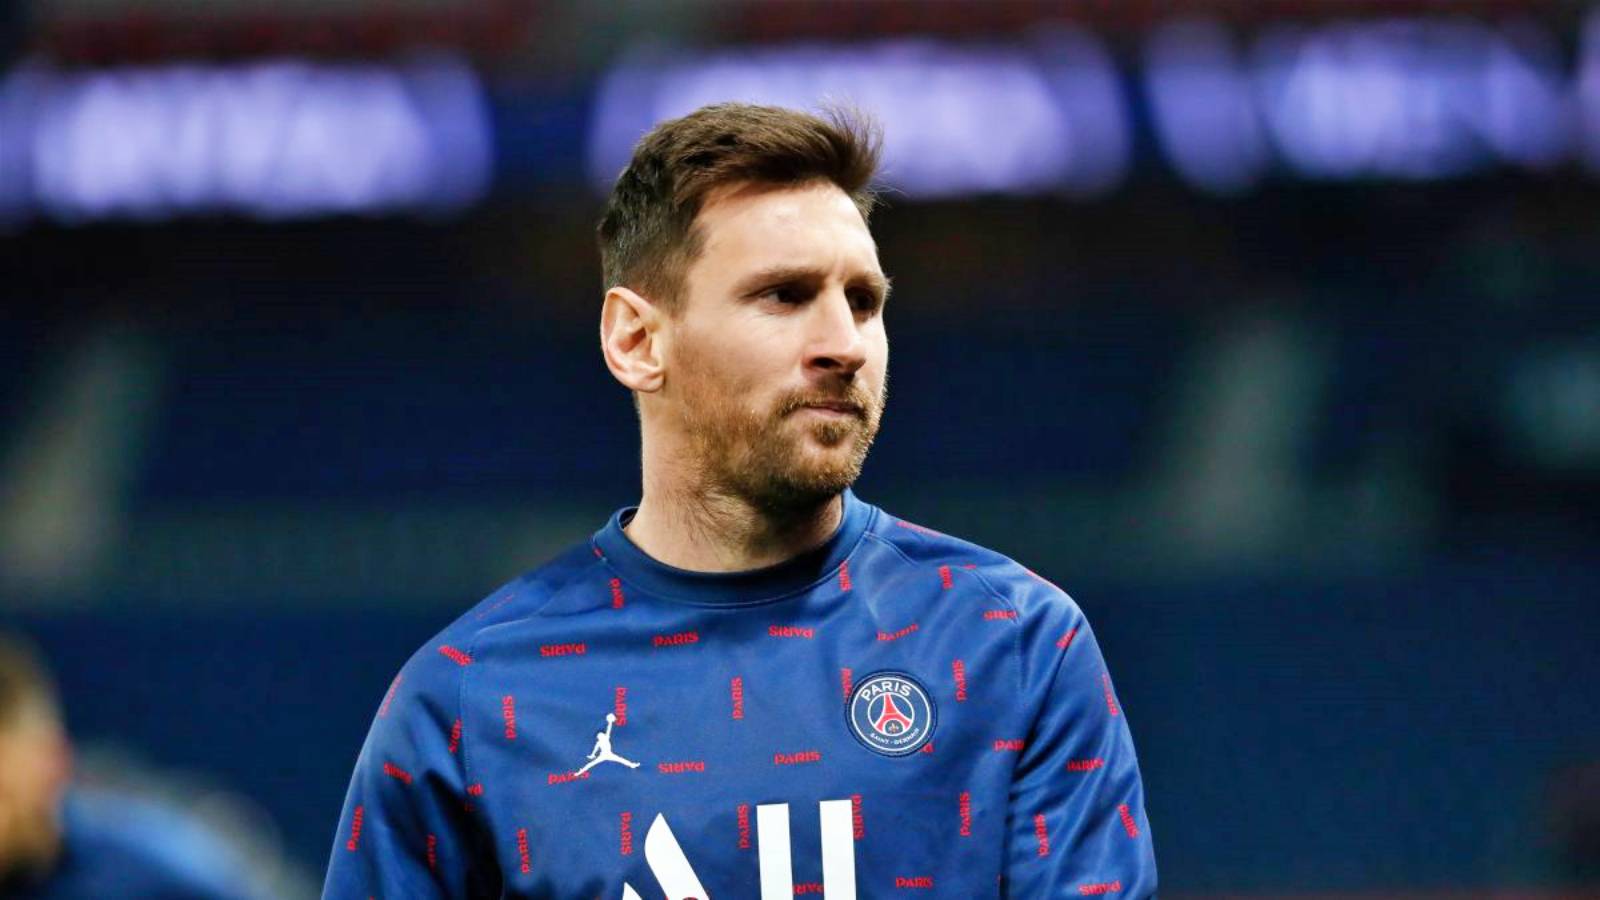 Lionel Messi: The announcement about the return to Barcelona that AMAZED the world thumbnail